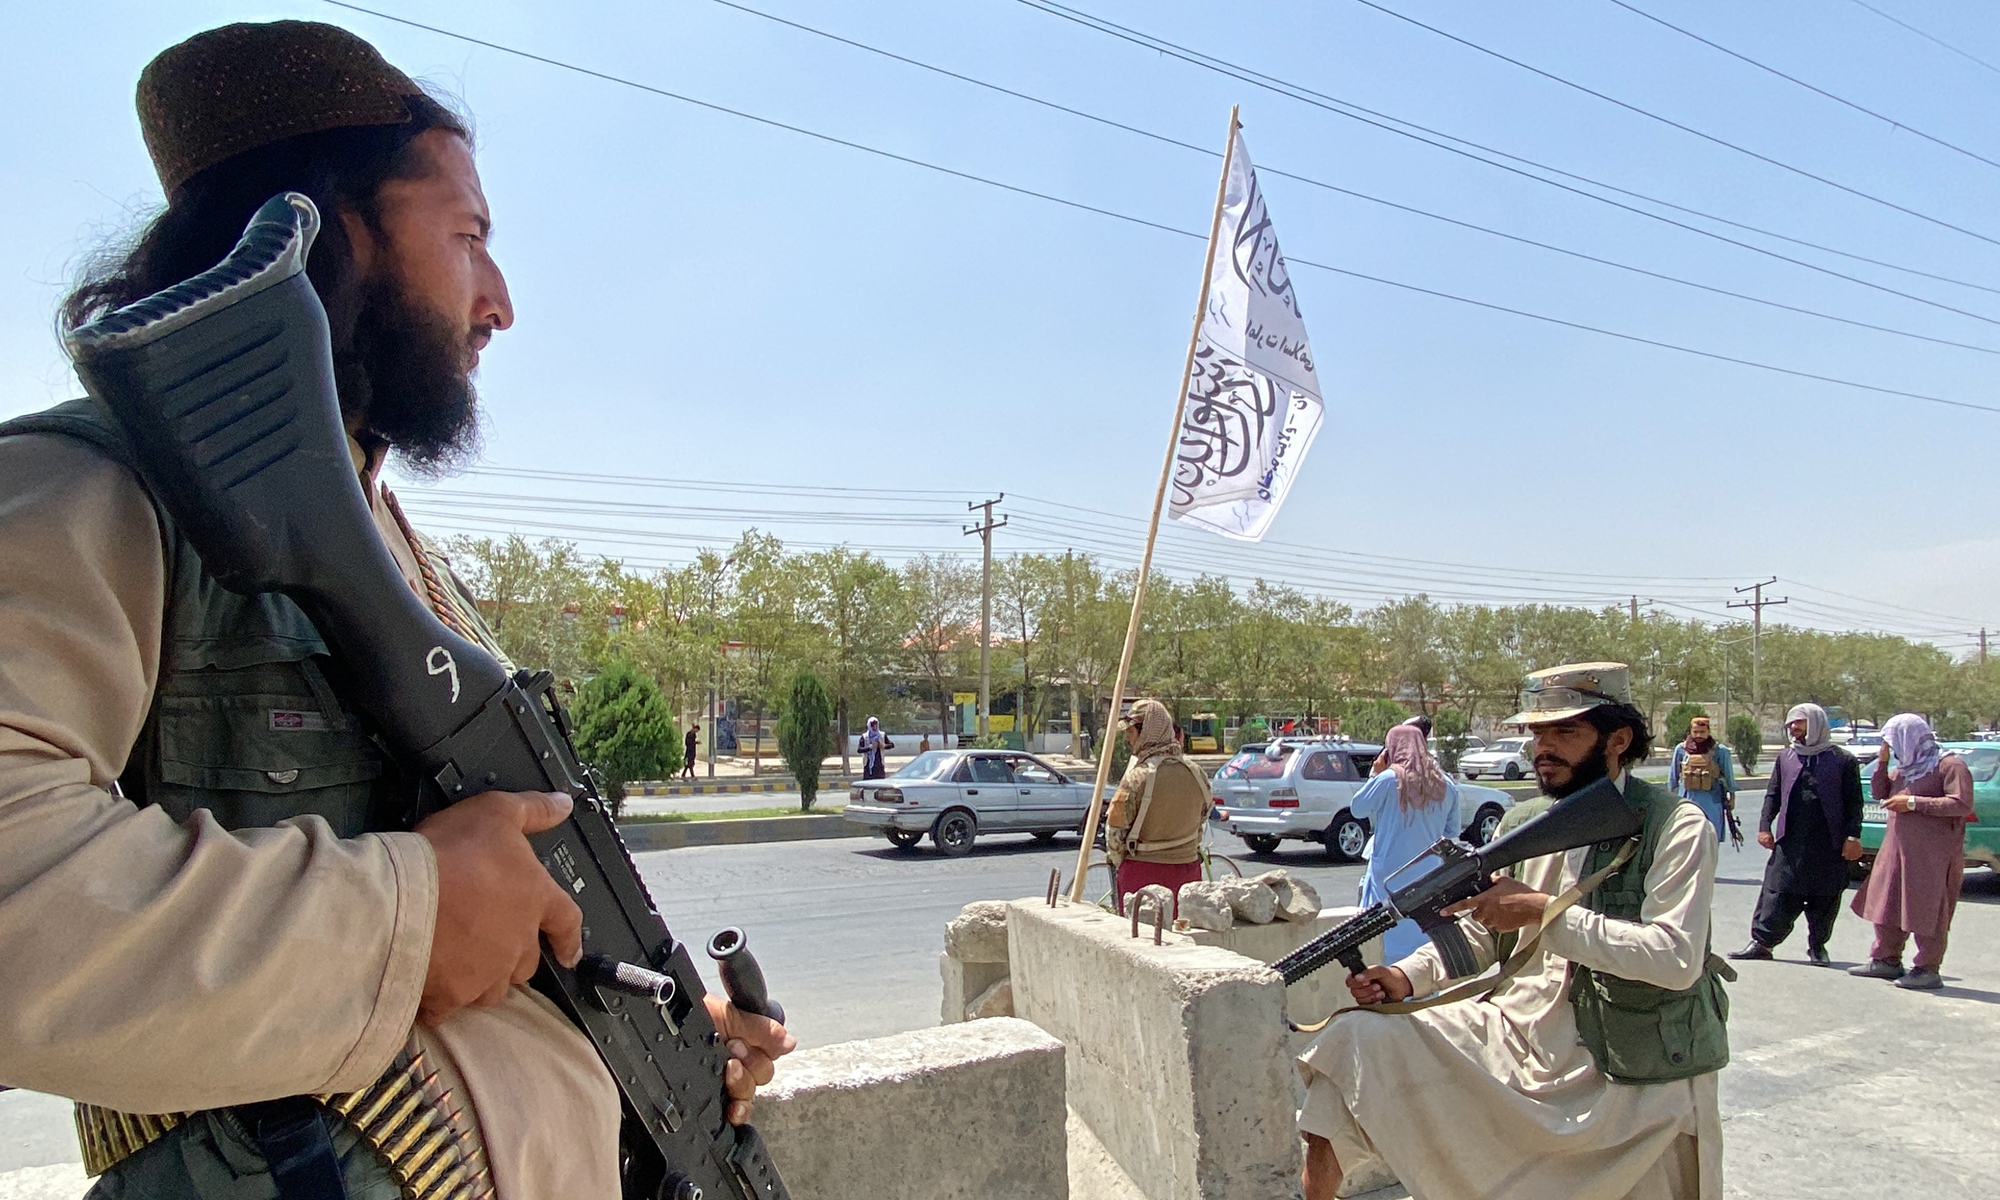 Taliban fighters stand guard at an entrance gate outside the Interior Ministry in Kabul on Tuesday. Photo: AFP